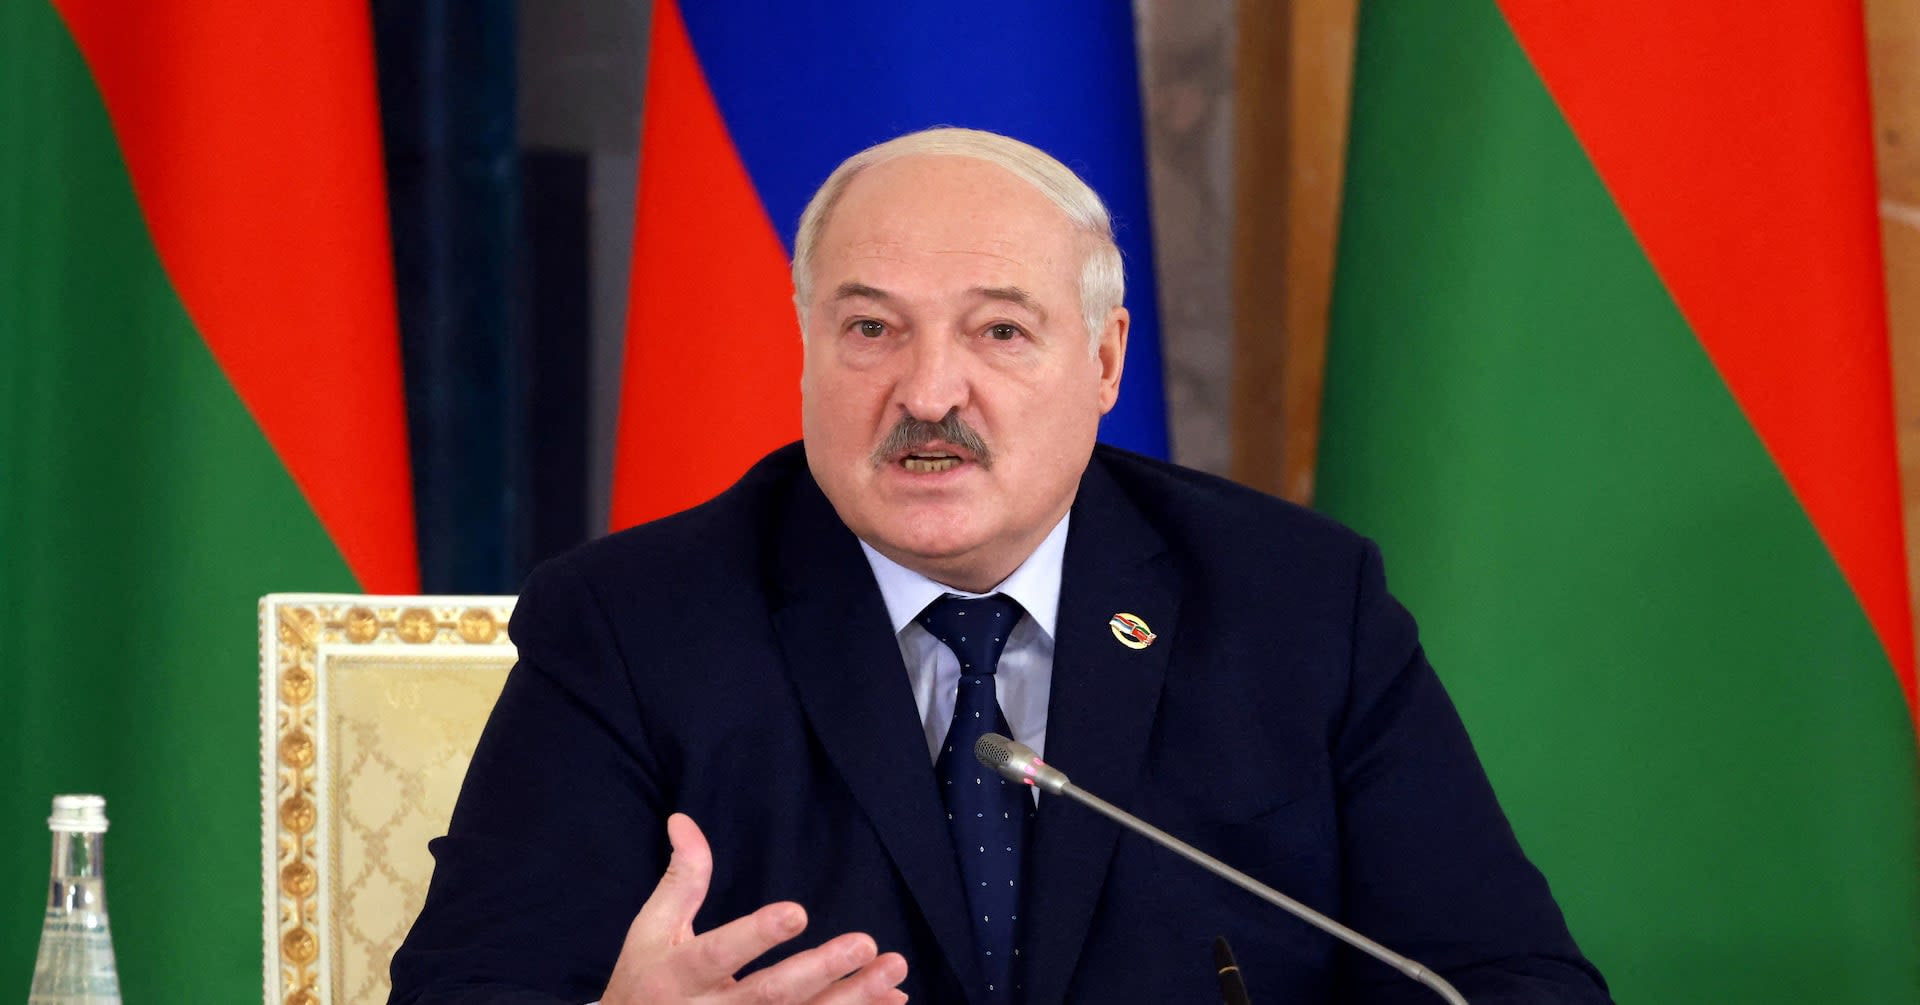 Lukashenko talks up threats to Belarus to justify 'nuclear deterrence'